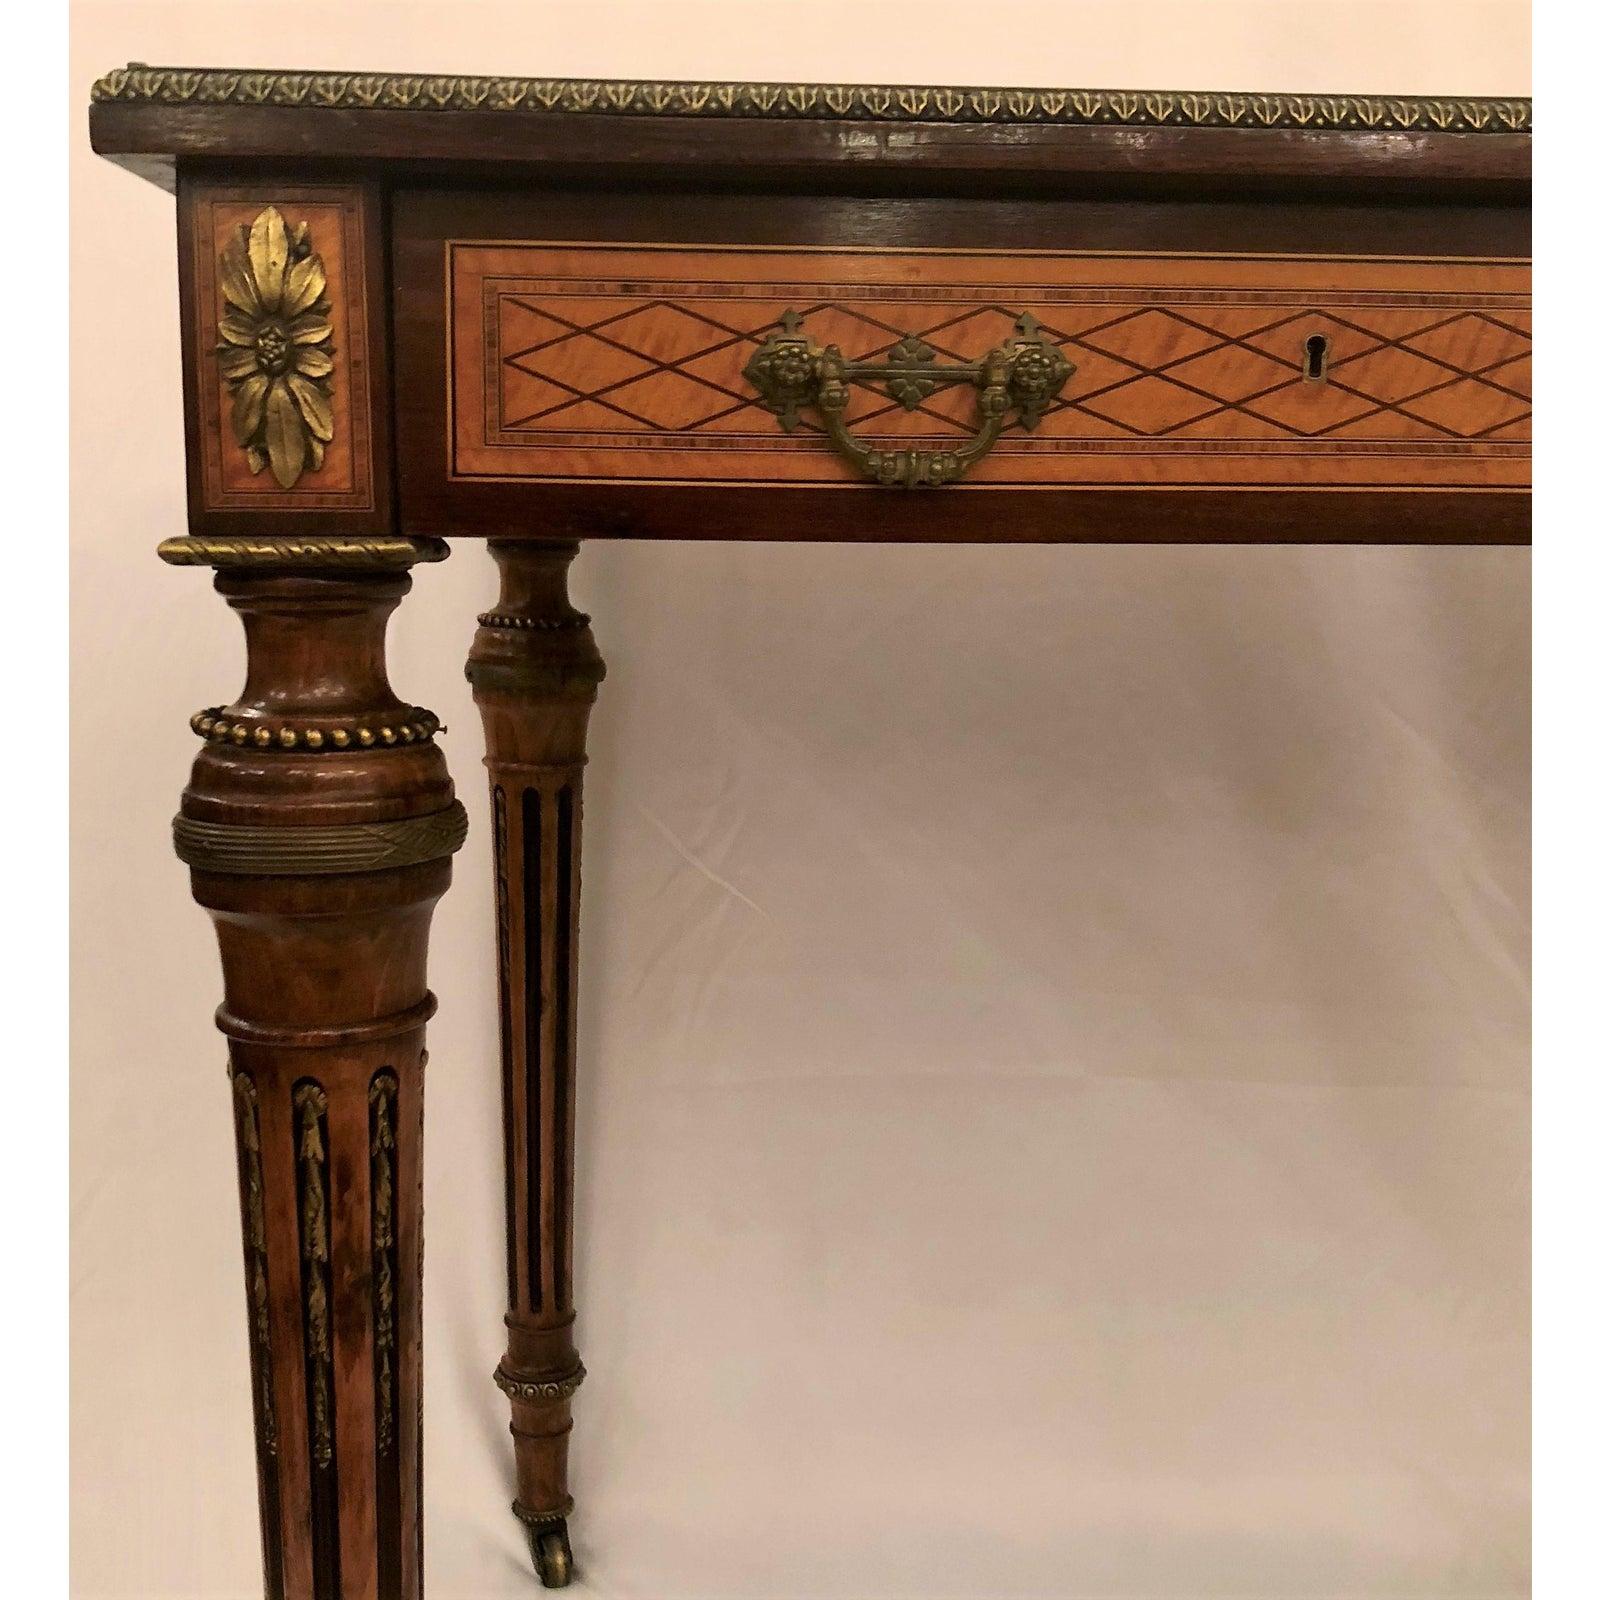 Antique 19th century French museum quality inlaid writing table with bronze trim. Excellent condition. Such a lovely antique piece!.
 